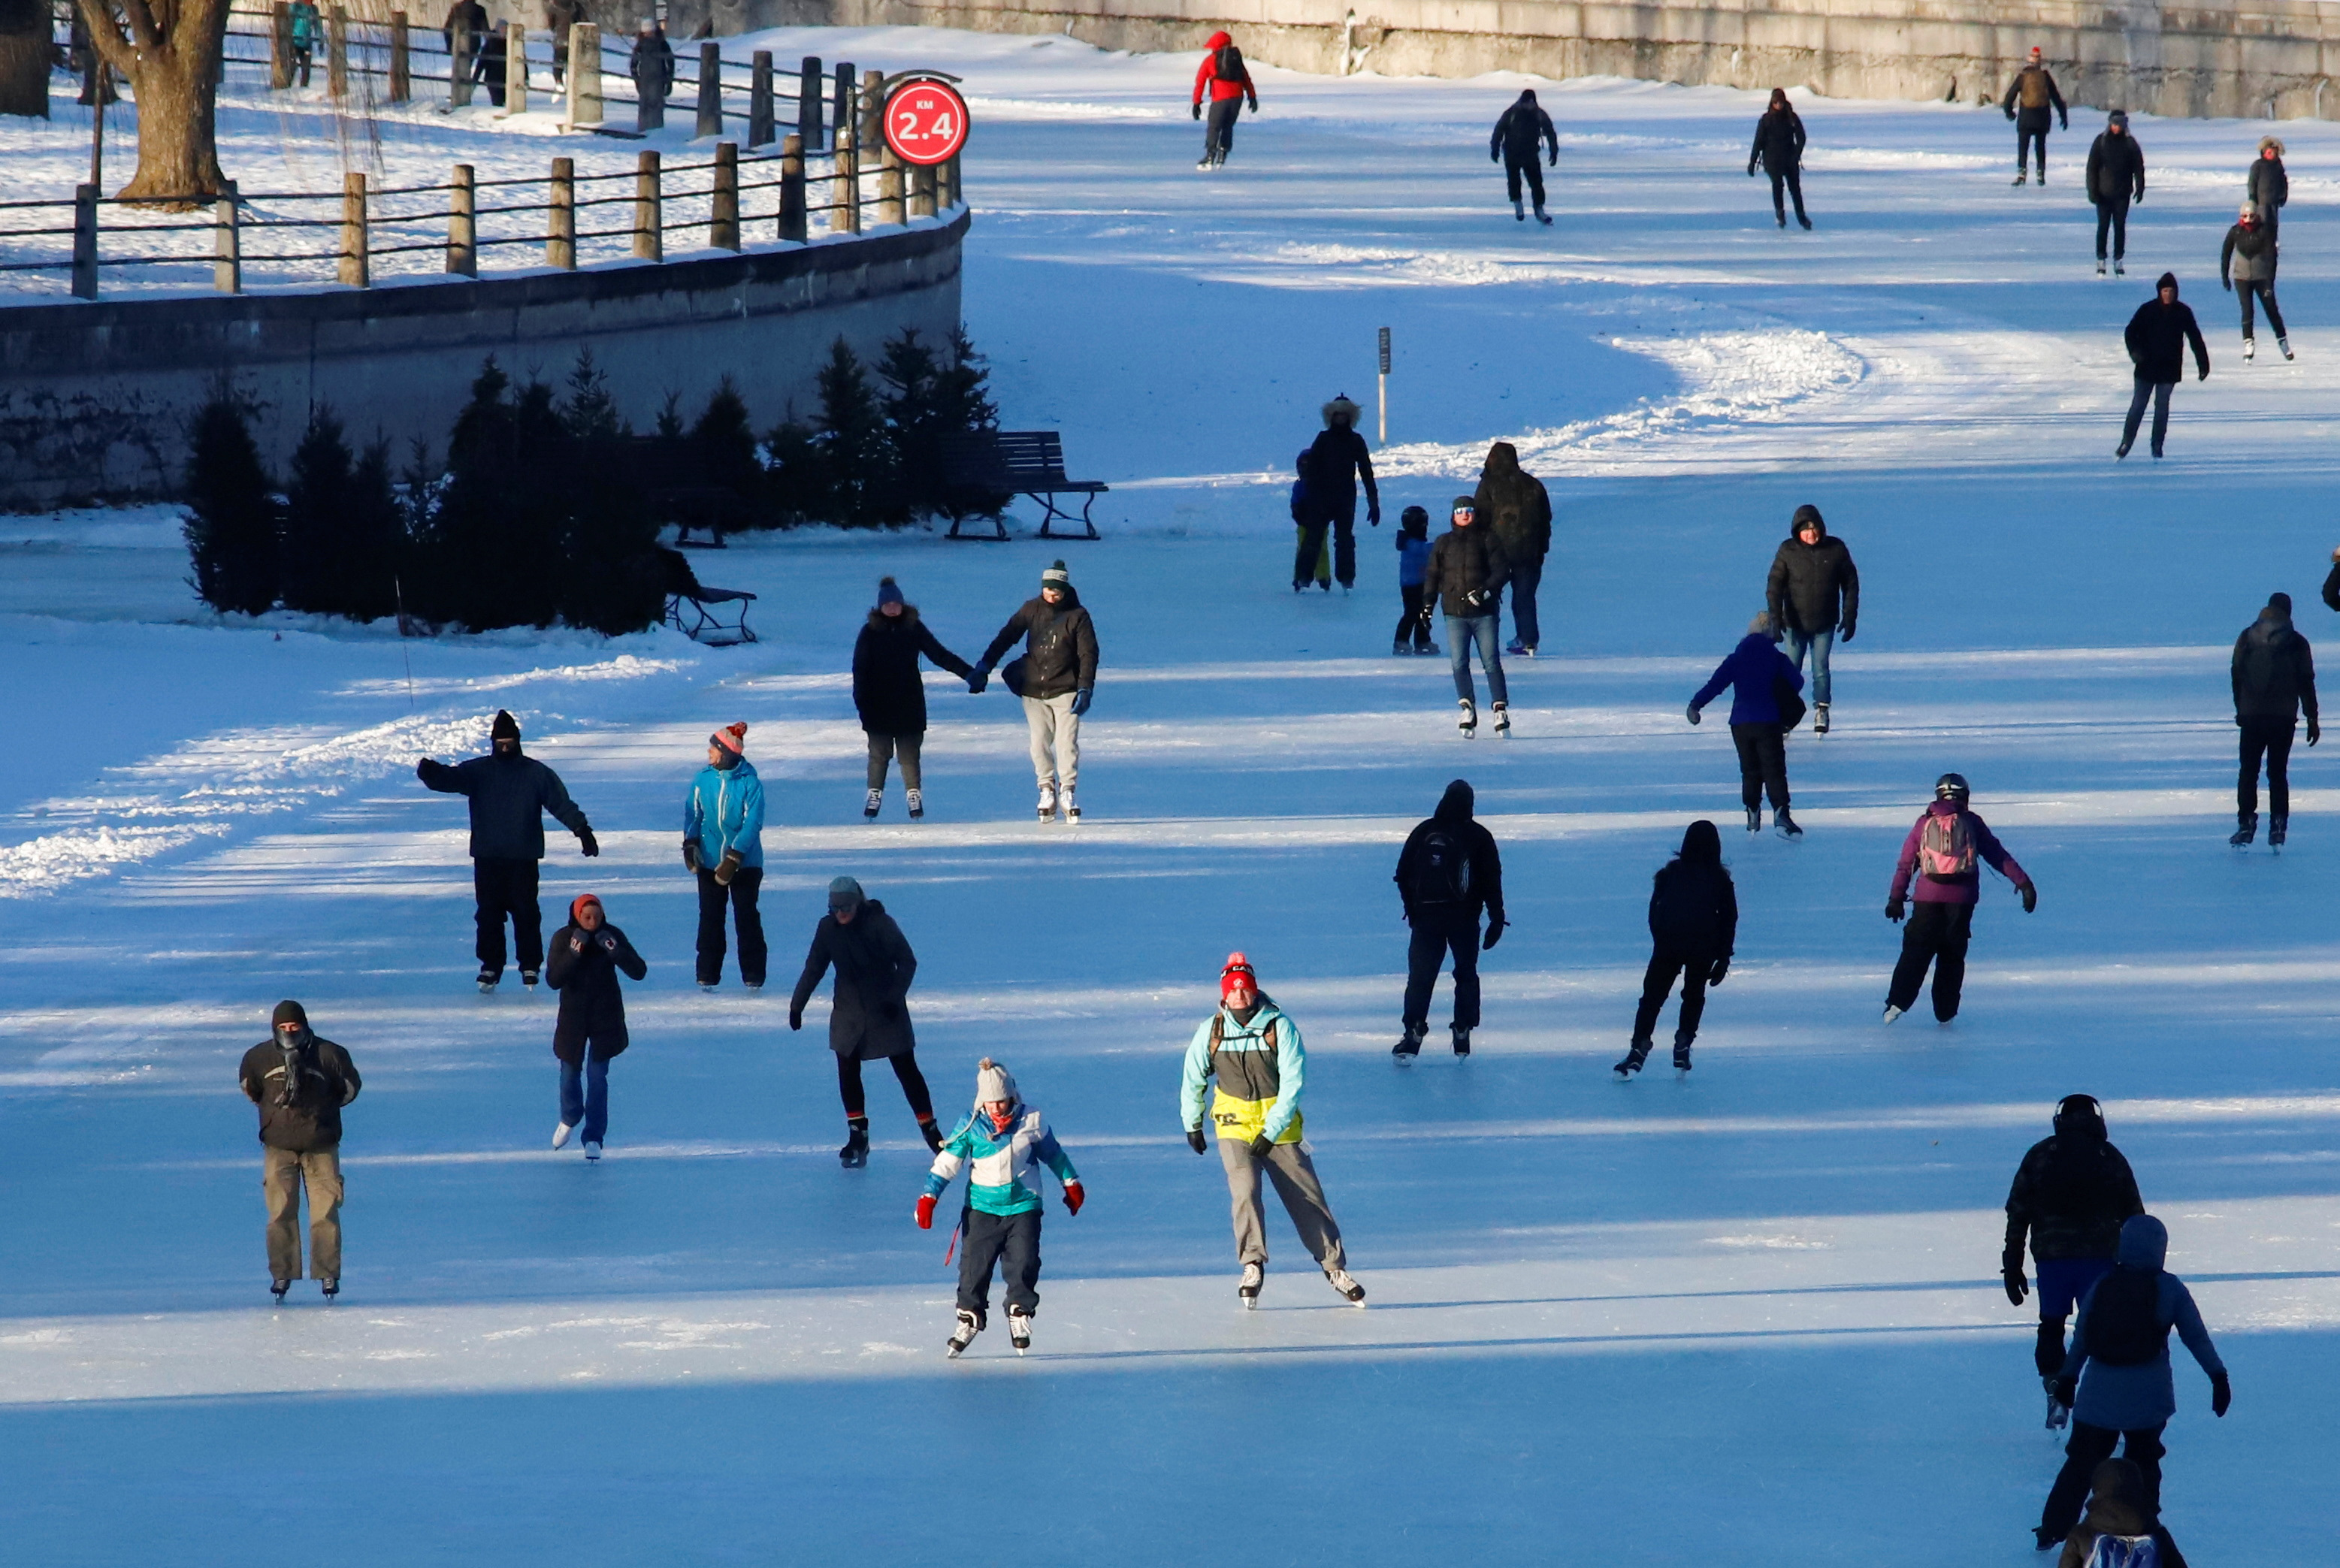 Can Inline Skating Be Done in Winter Or on Ice? Discover the Cold-Weather Thrills!